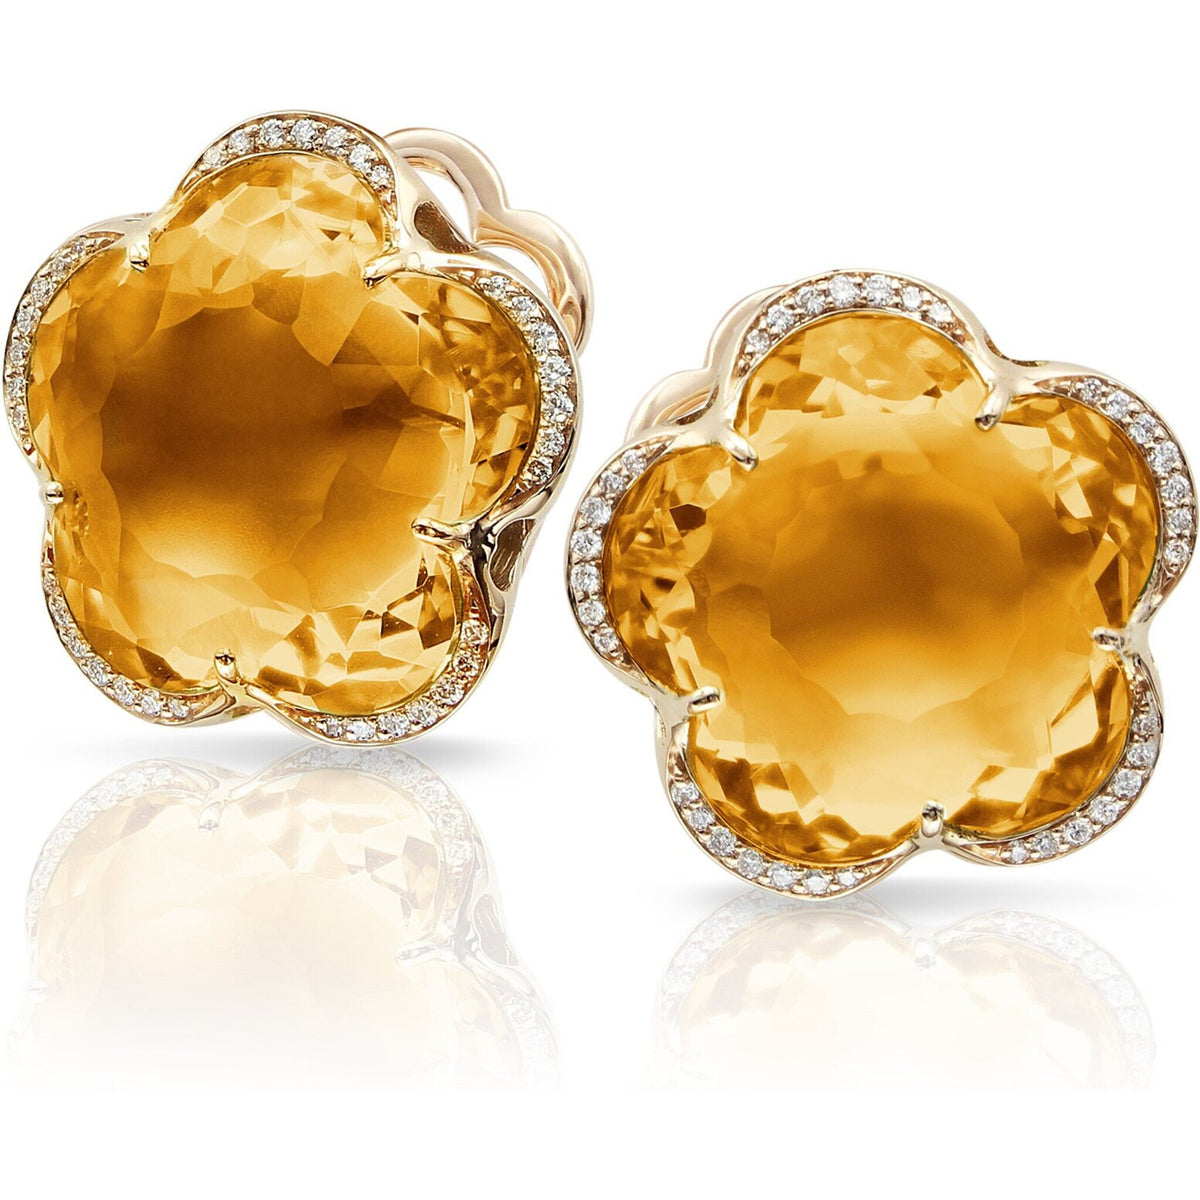 Pasquale Bruni - Bon Ton Divine Stud Earrings in 18k Rose Gold with Citrine and Diamonds